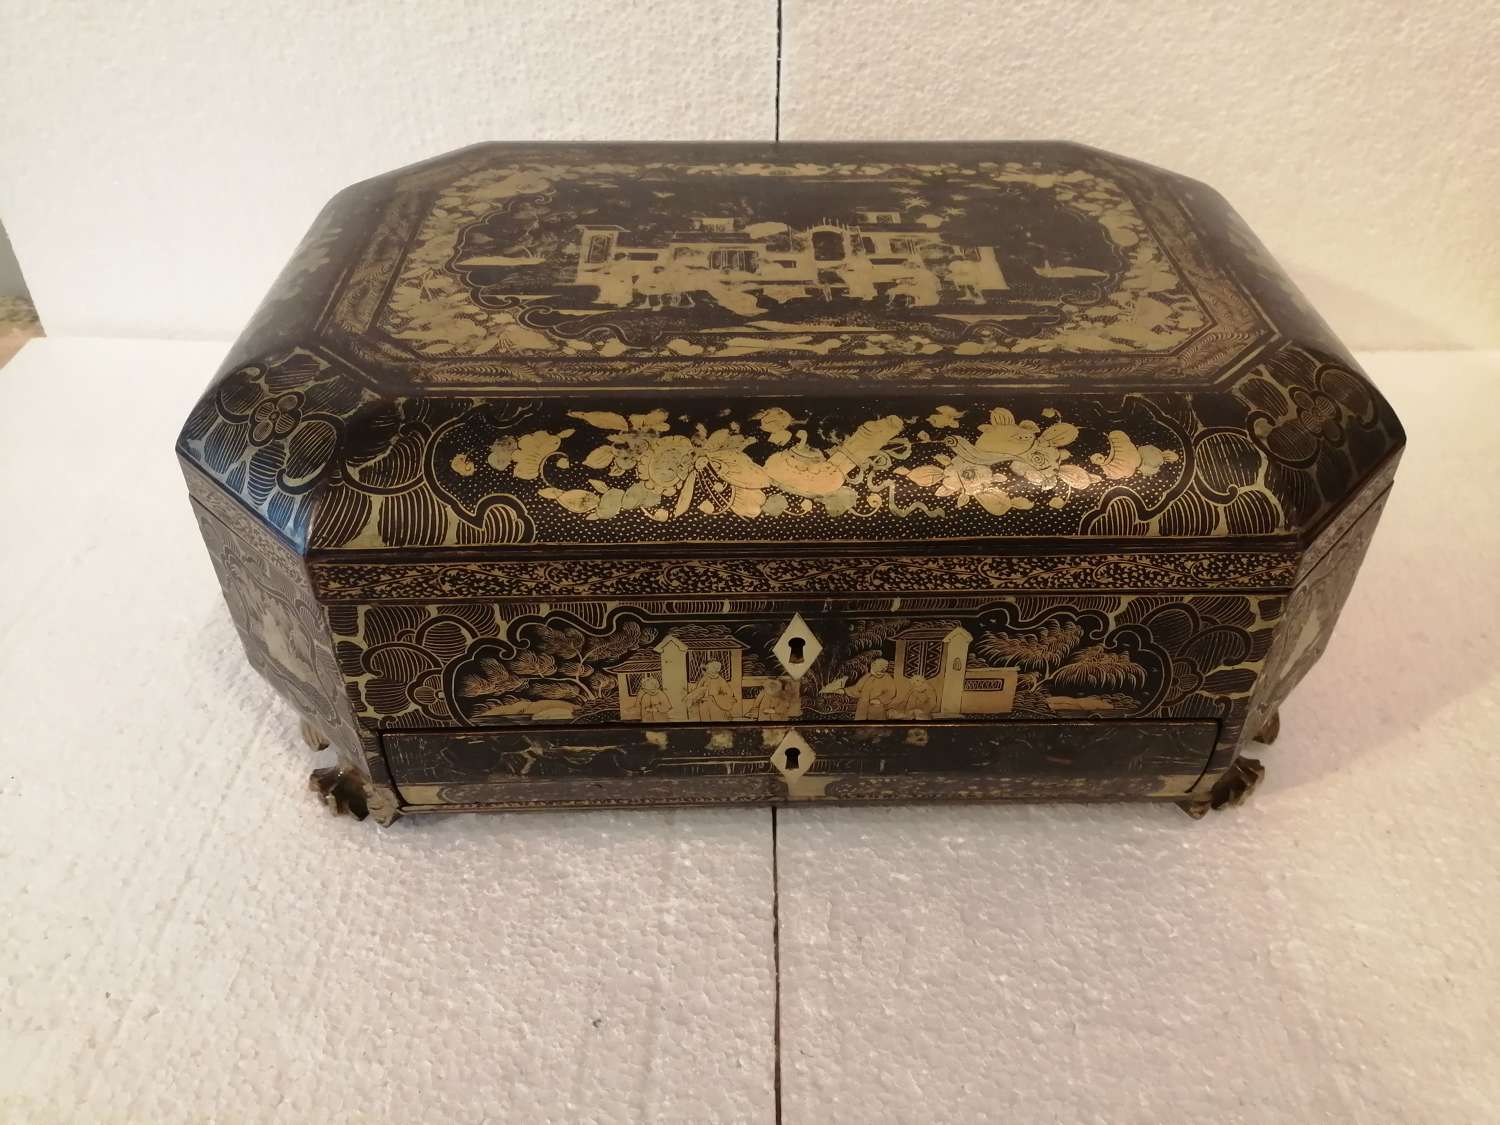 A 19th Century Chinese black and gold lacquer work Box